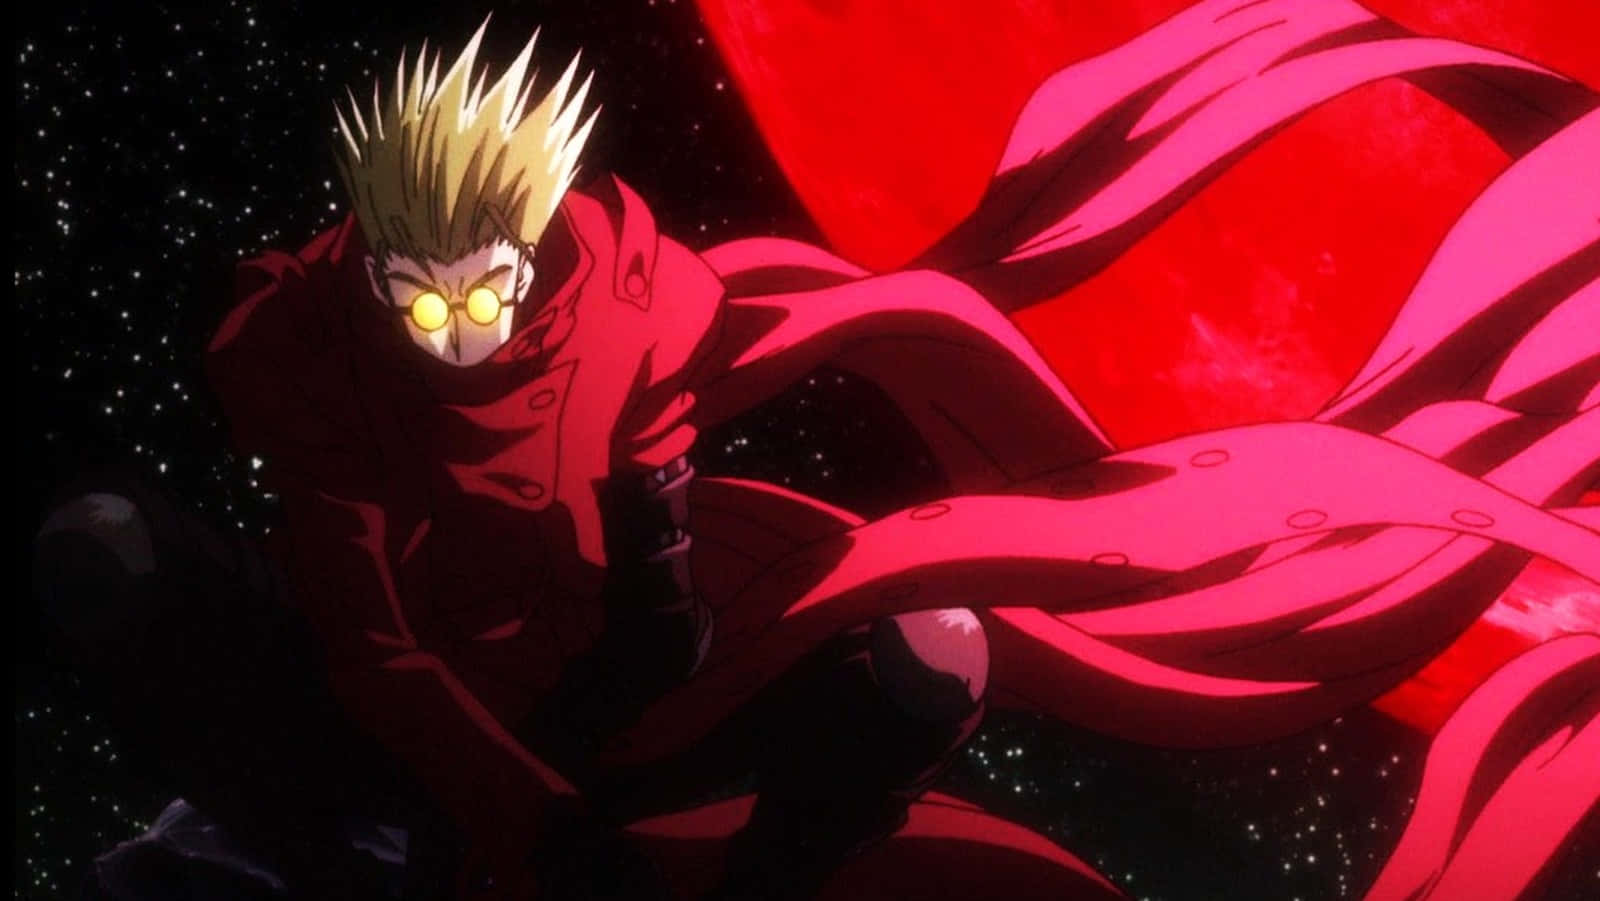 Vash, the Stampede - balancing action&peace in the universe of Trigun